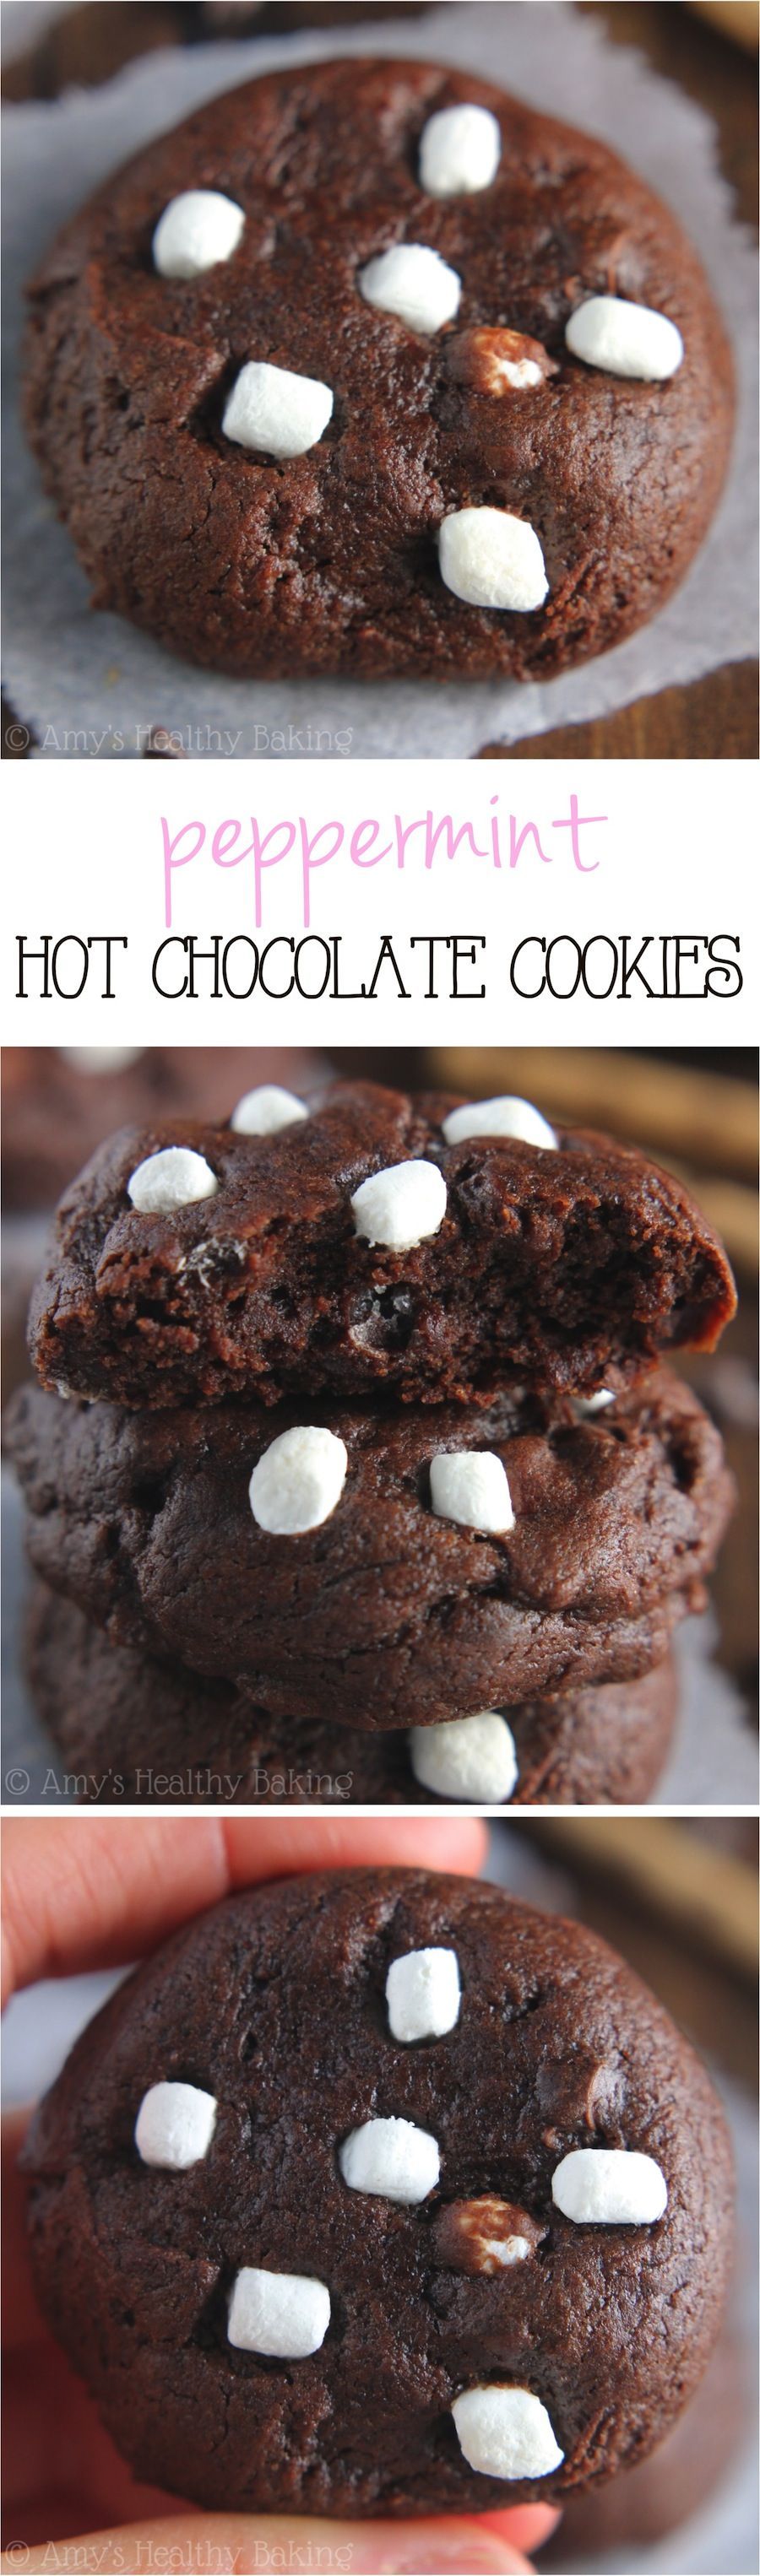 Peppermint Hot Chocolate Cookies — they taste even better than the drink! SO fudgy & rich. These skinny cookies don’t taste